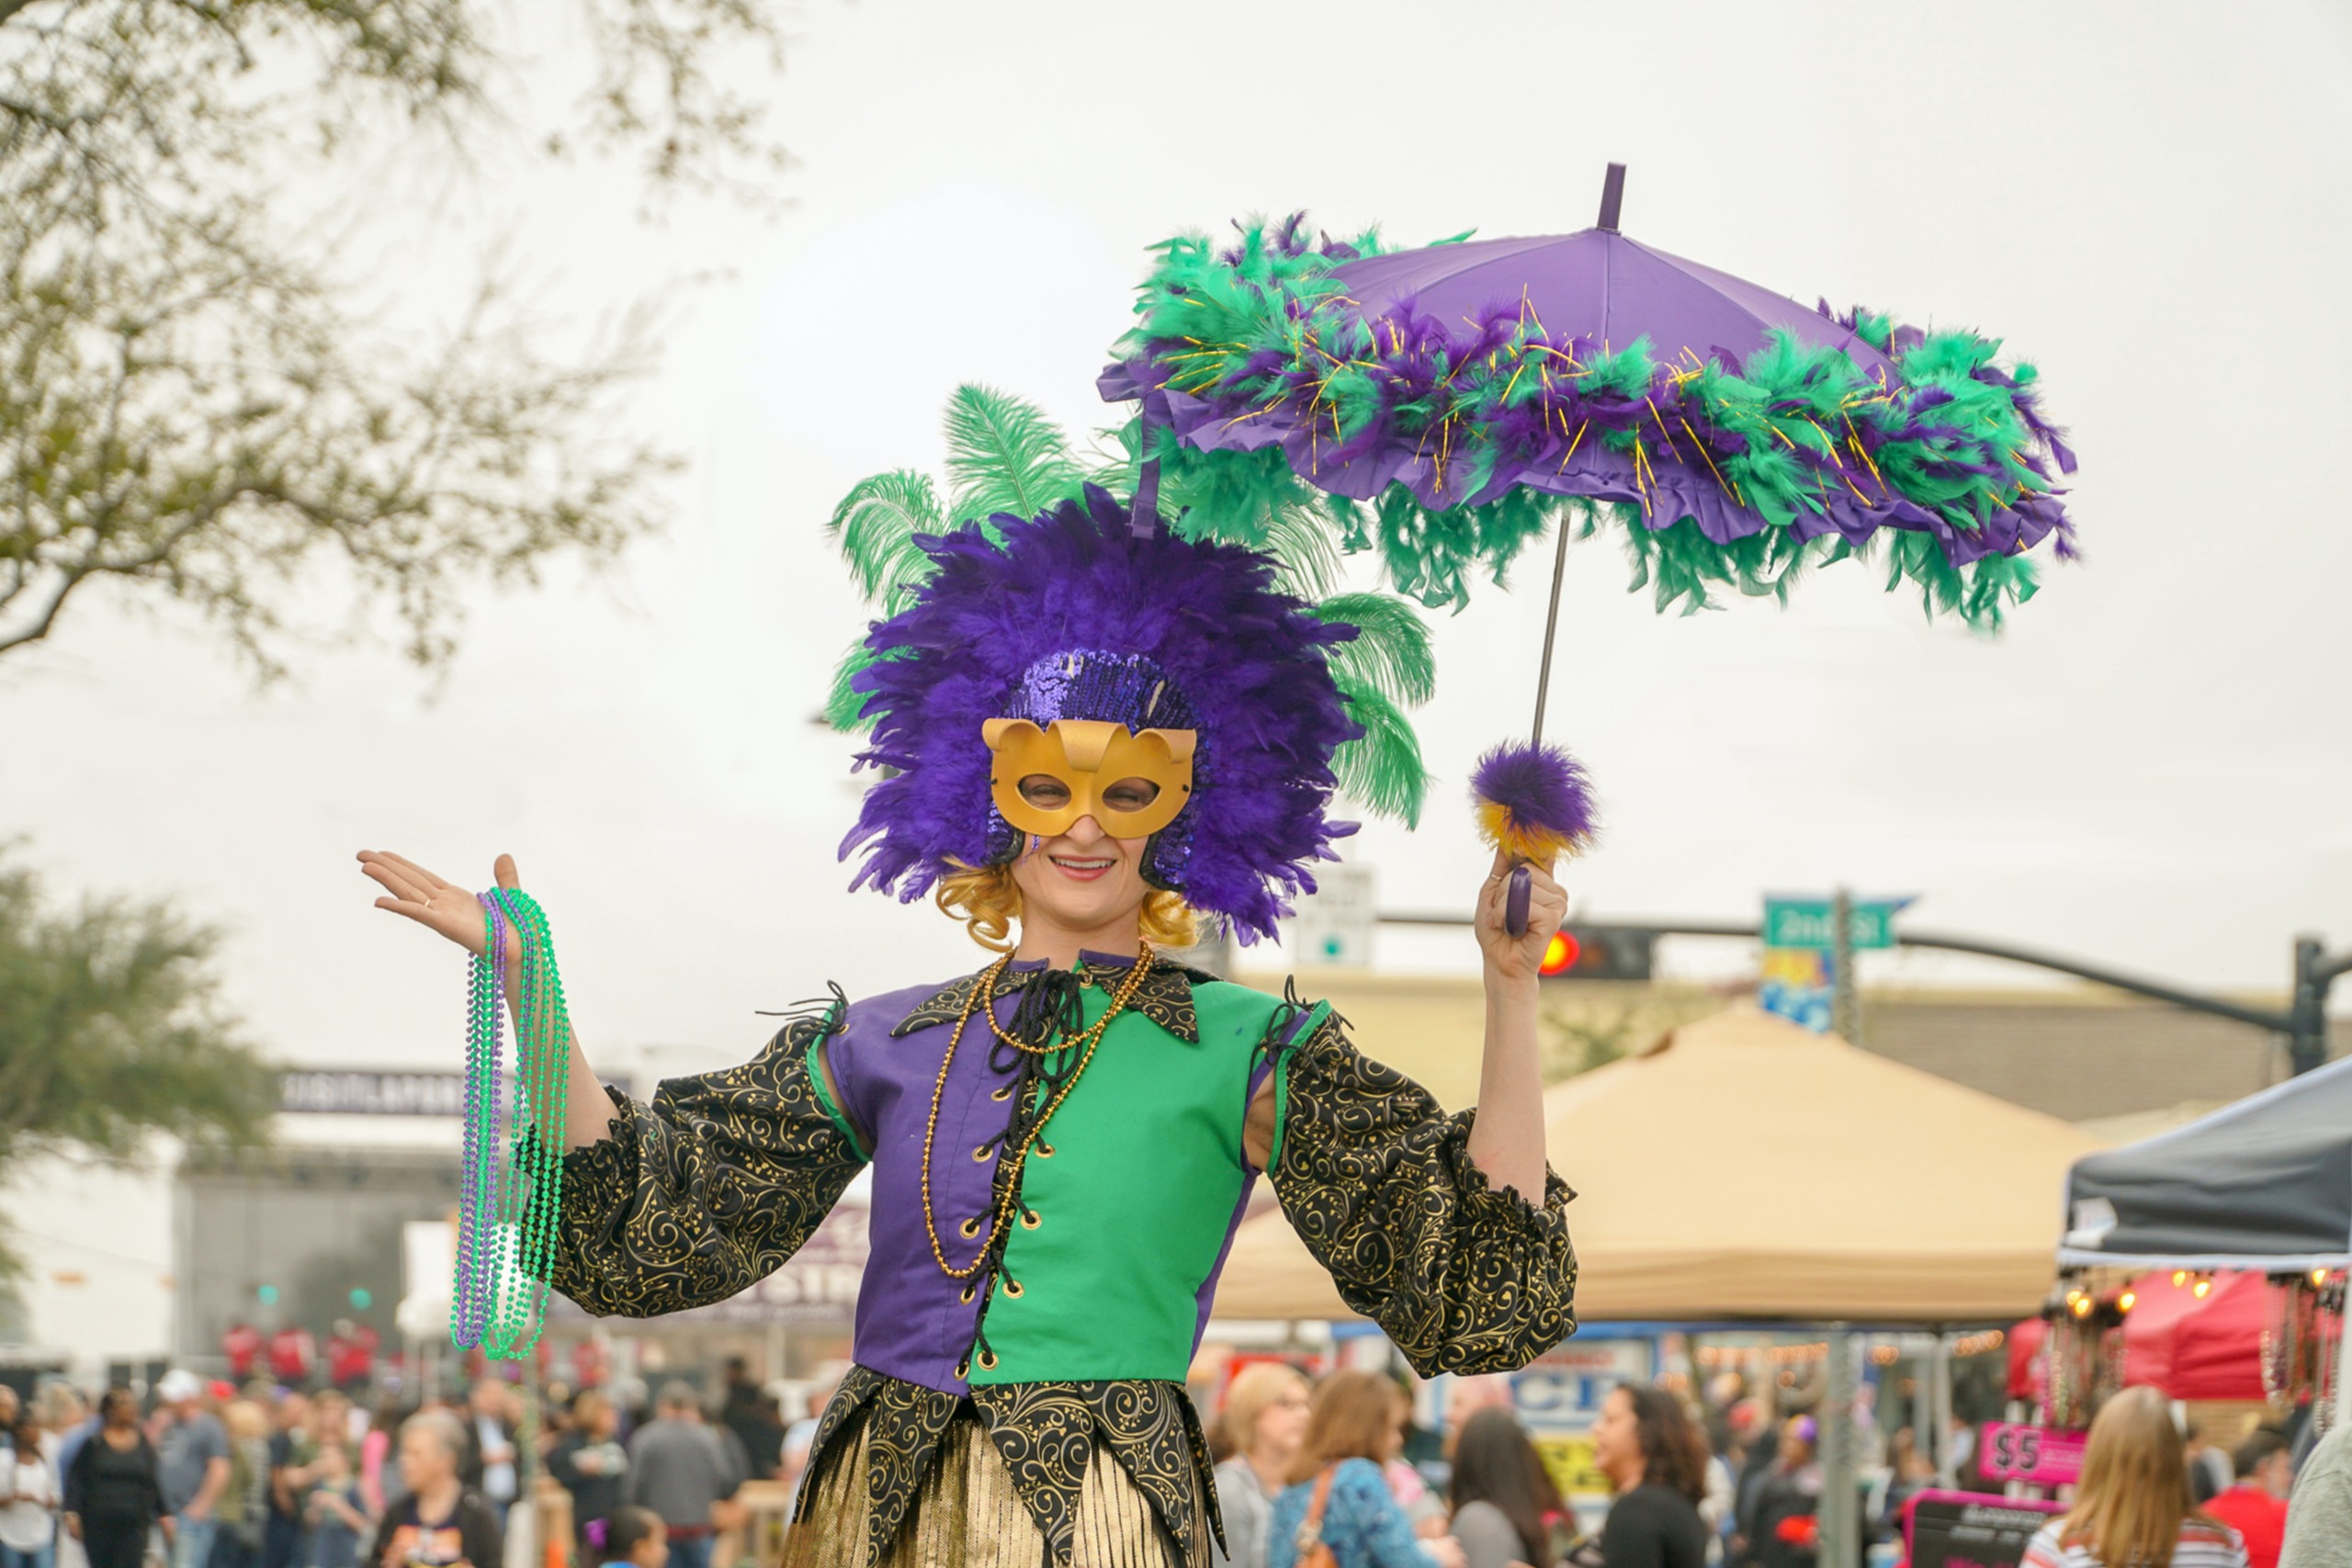 Beads, King Cake, and Carnivals – The Top Destinations to Celebrate Mardi Gras 1